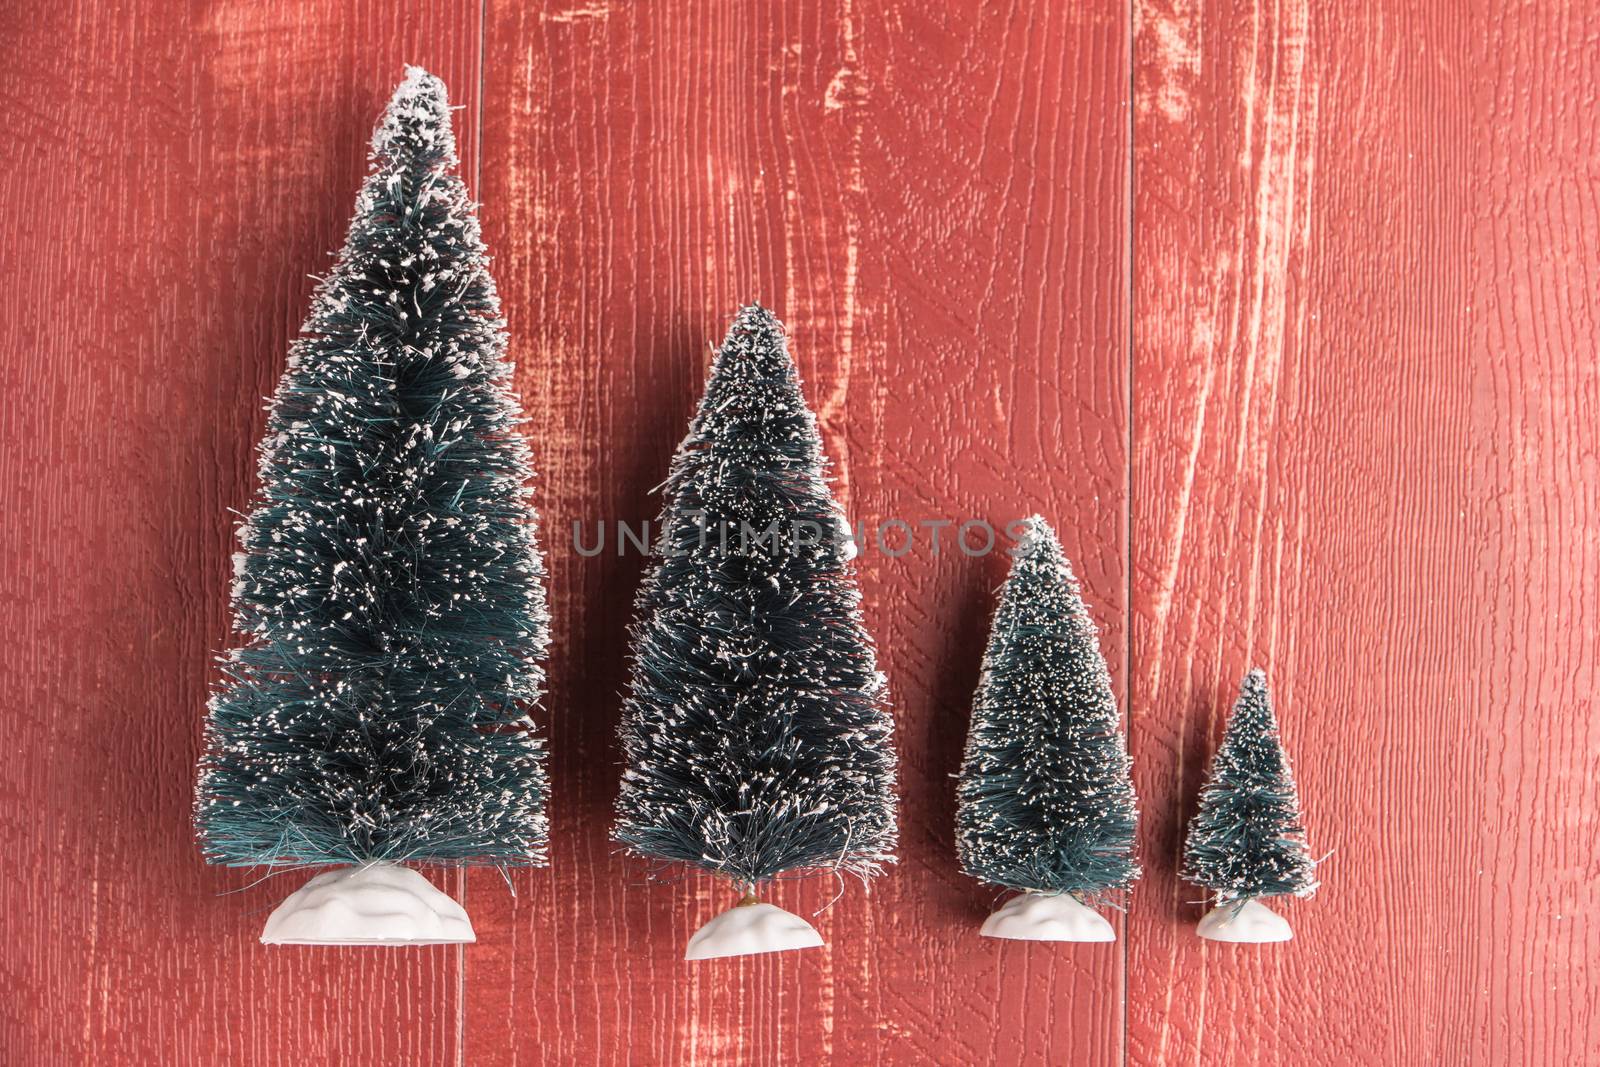 Miniature evergreen trees by AnaMarques